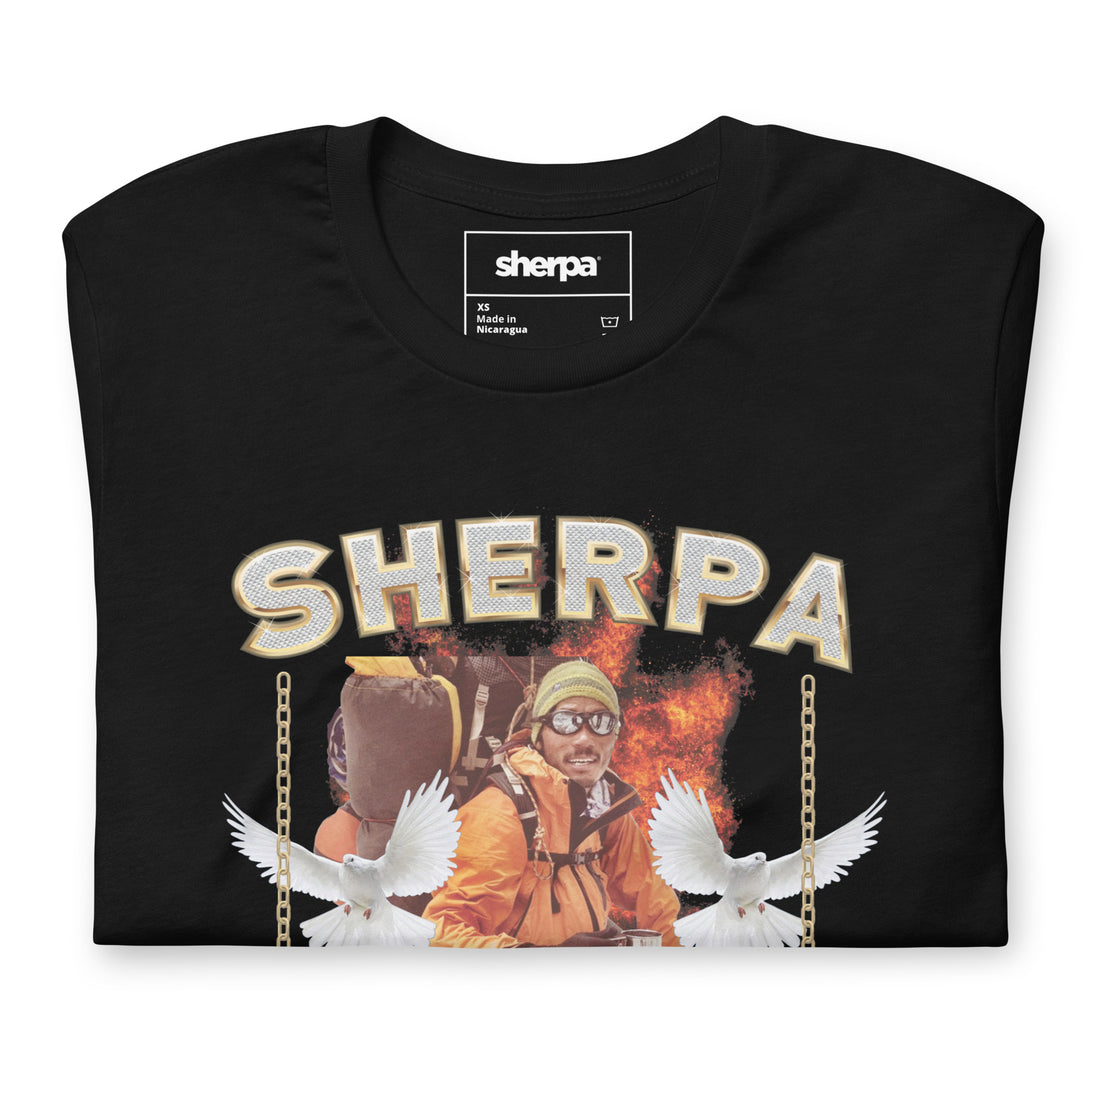 Sherpa Takeover - Unisex T-Shirt - Sherpa THC